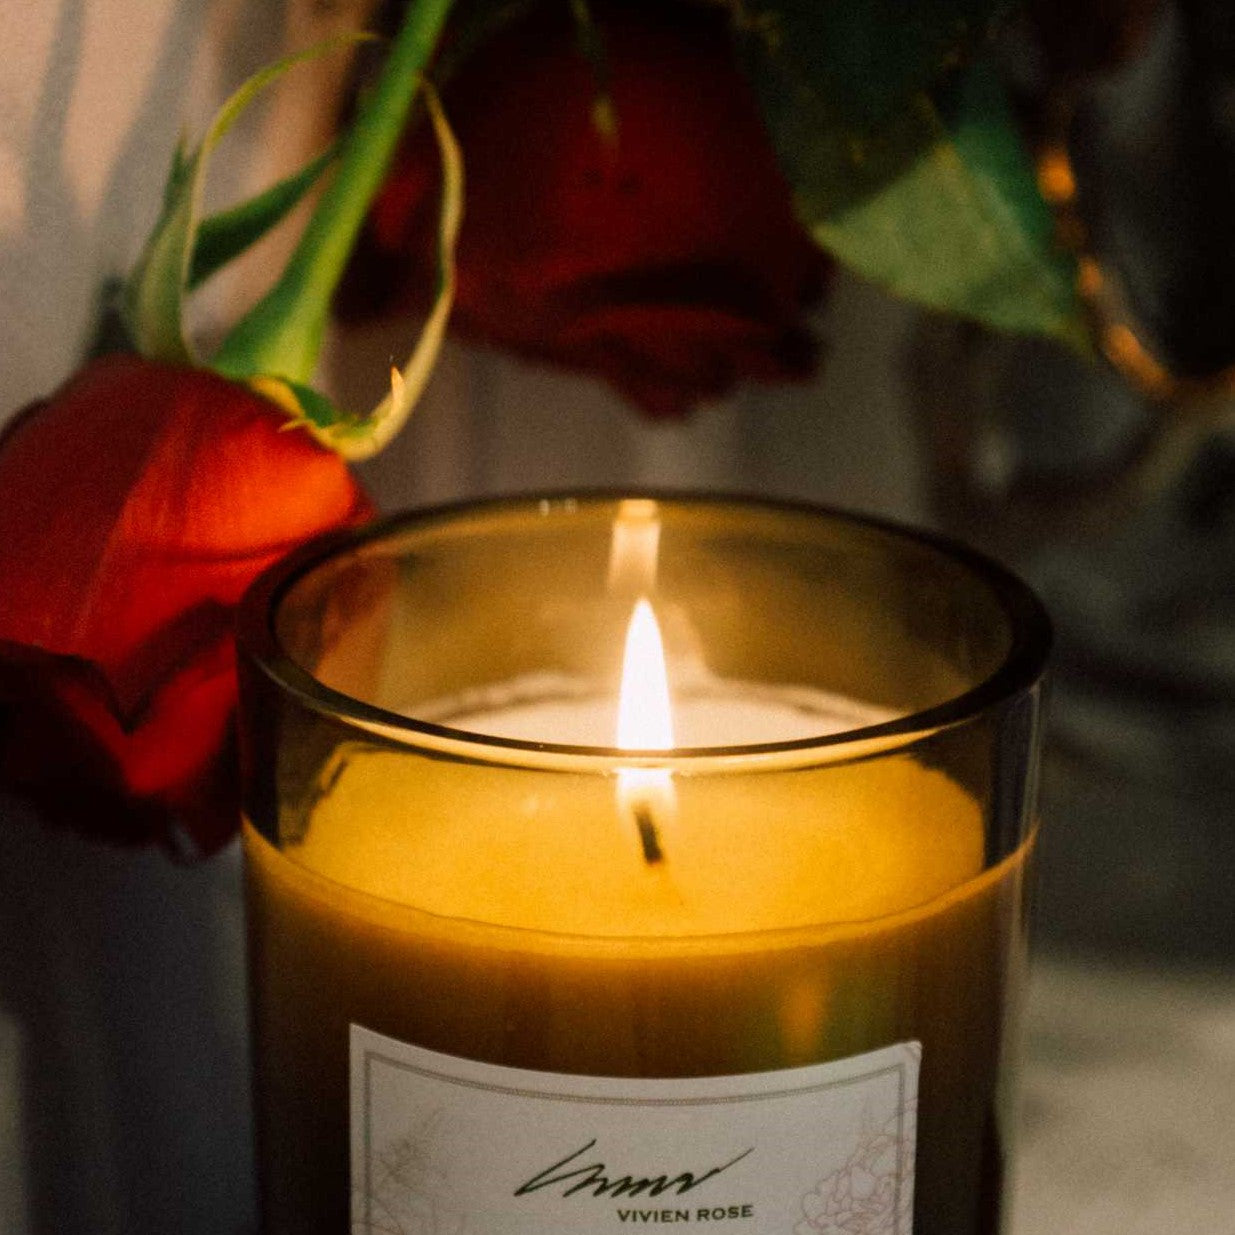 VIVIEN ROSE LIMITED RELEASE AROMATIC CANDLE